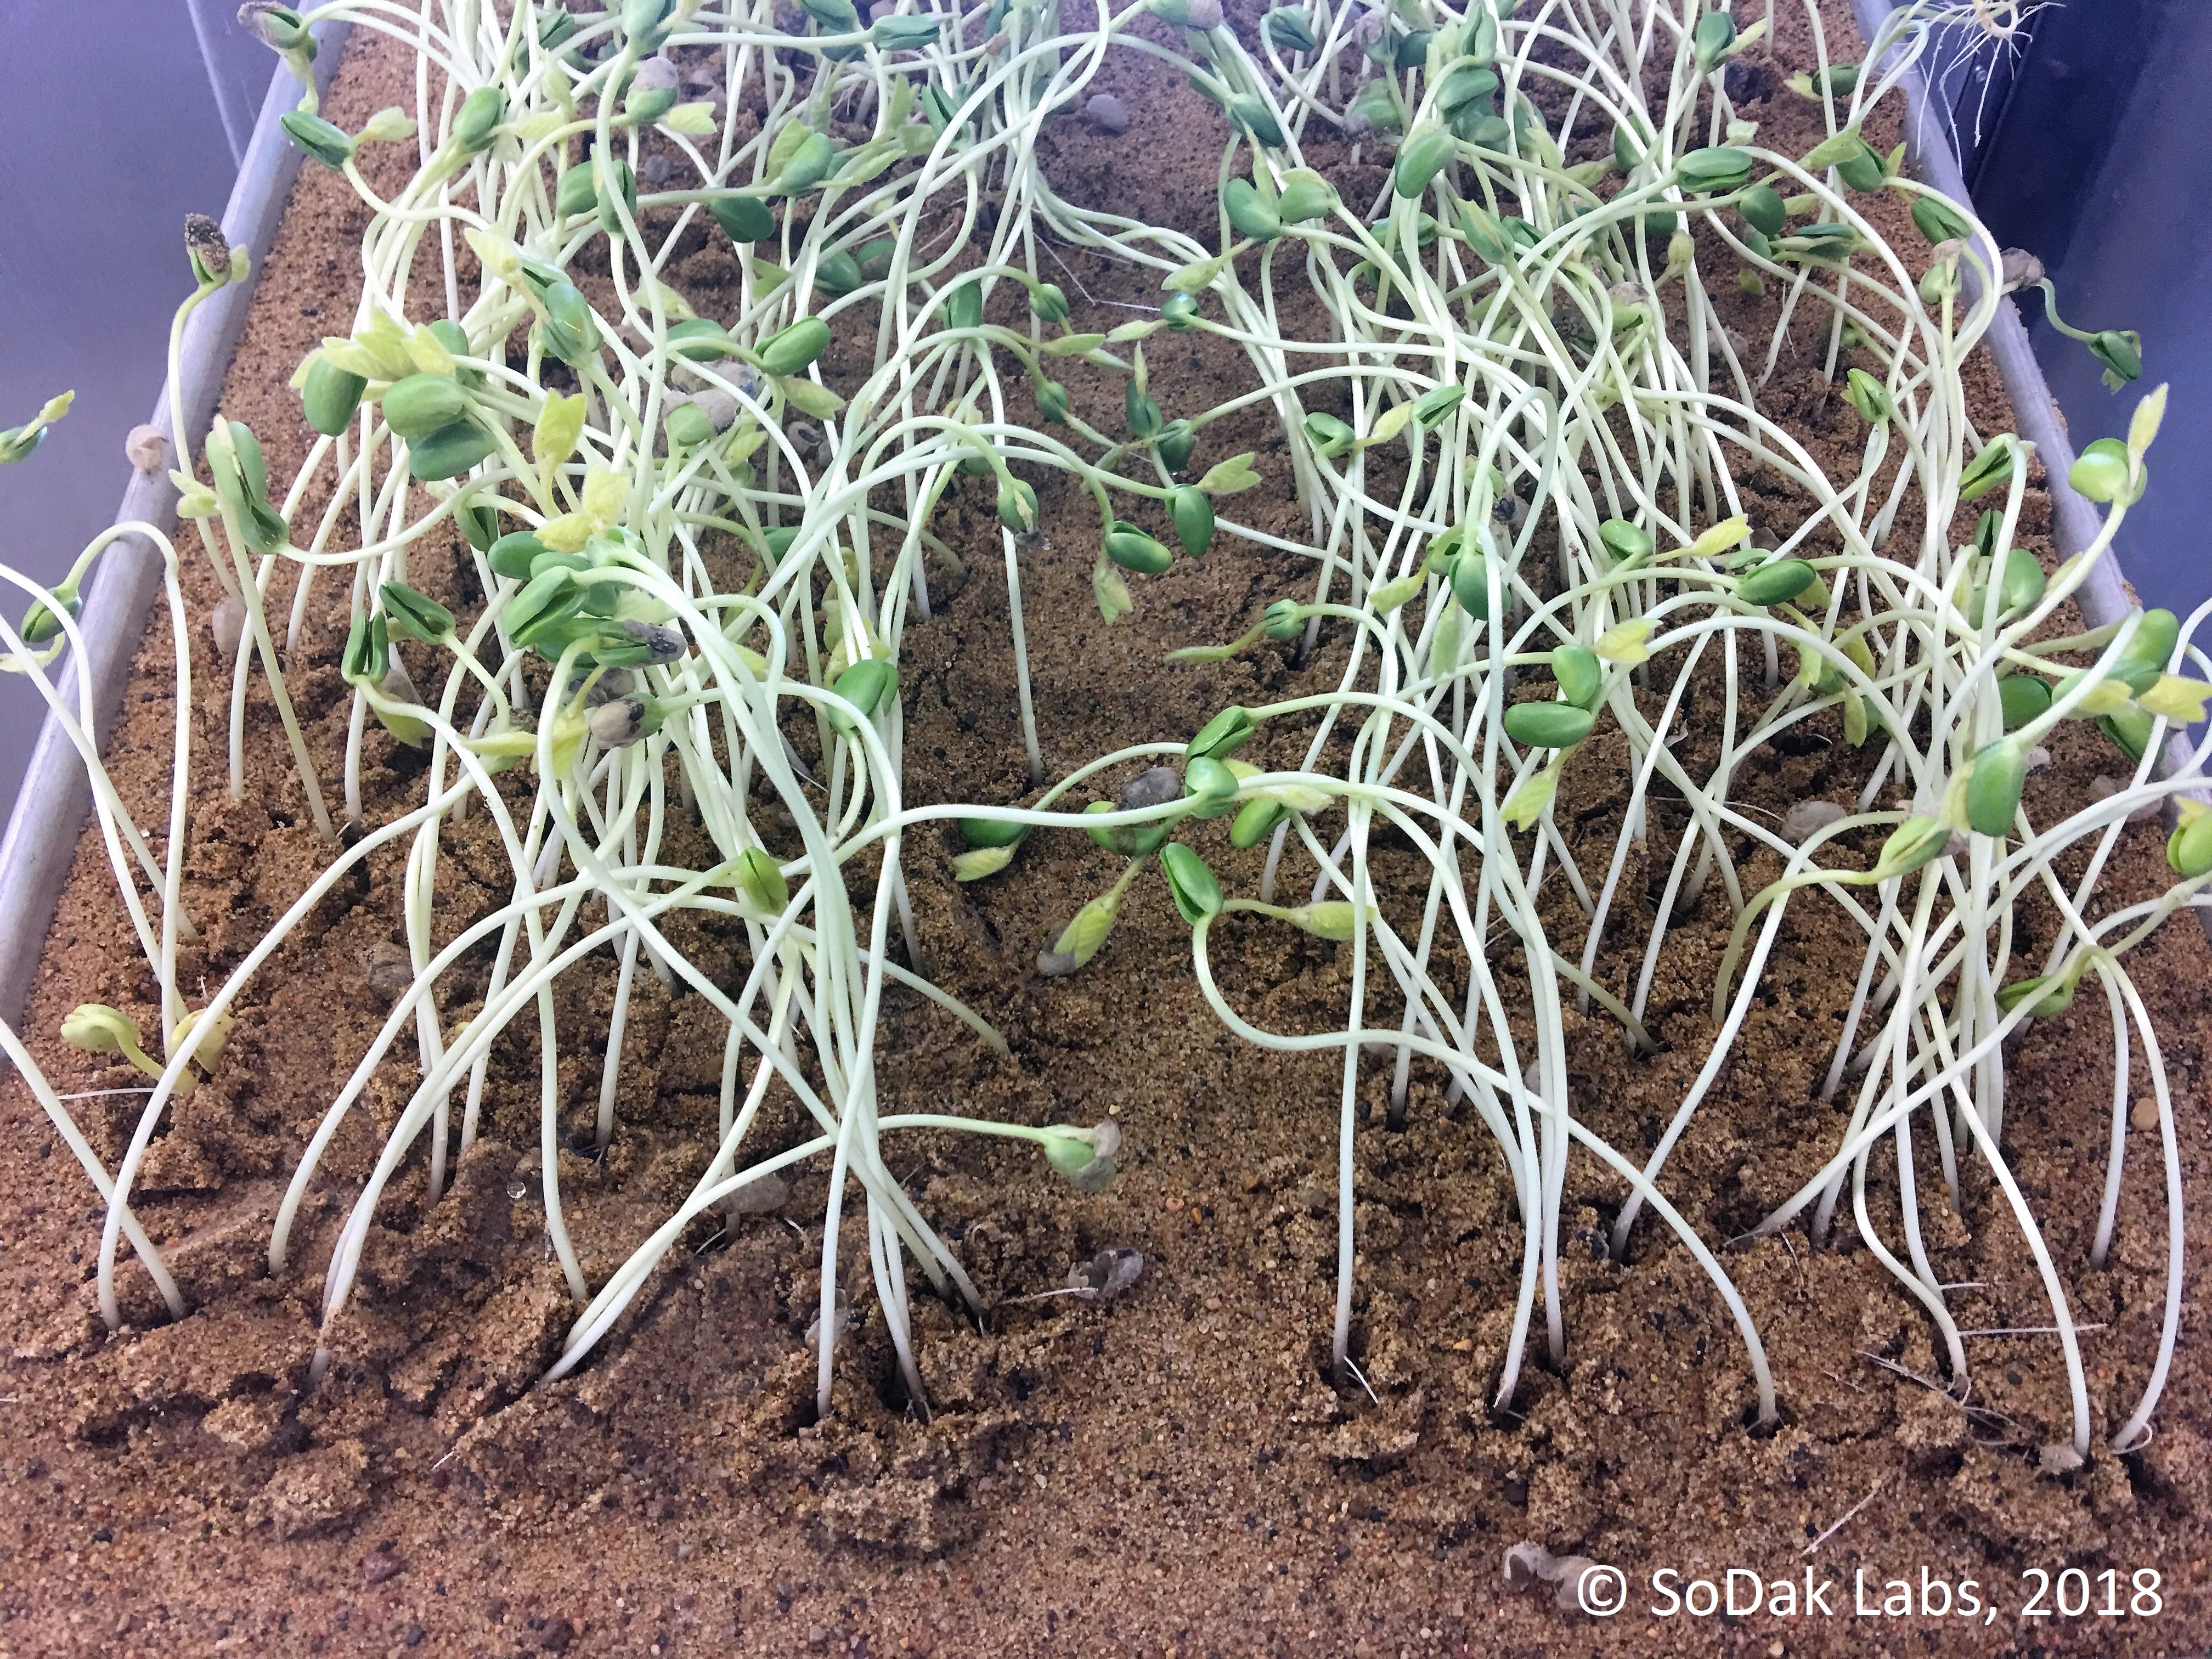 Soybean seedlings ready for germination evaluation